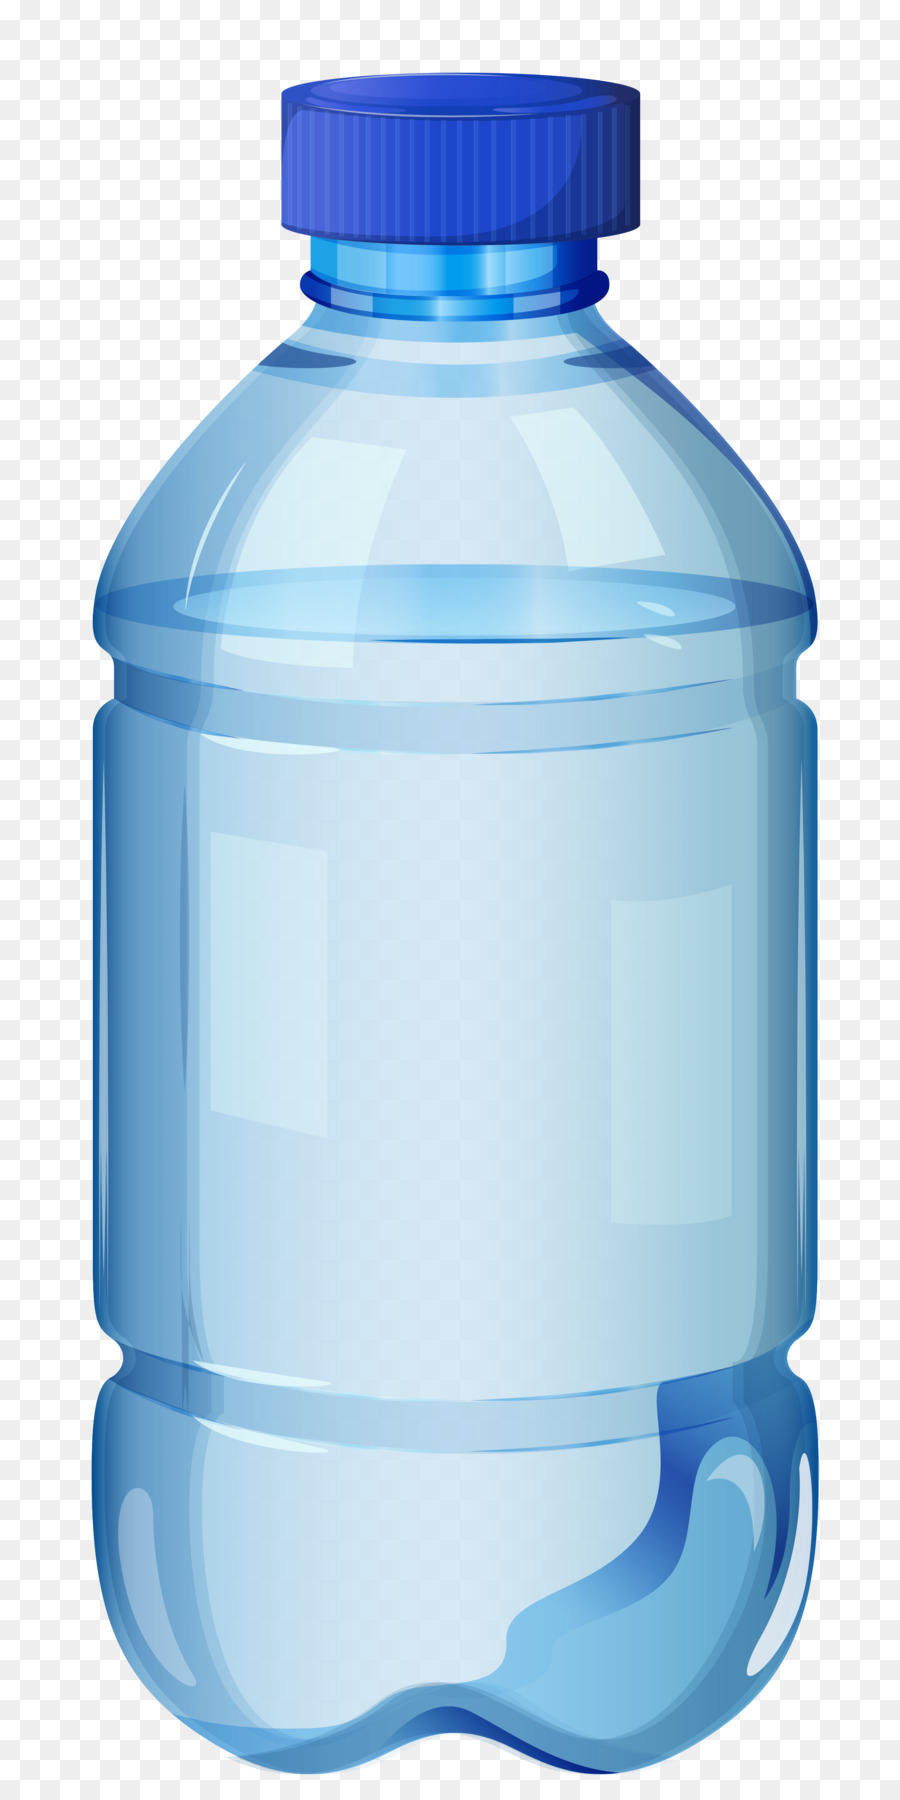 Water bottle Bottled water Clip art - Cute Plastic Cliparts png download - 2376*4752 - Free Transparent Water Bottle png Download.